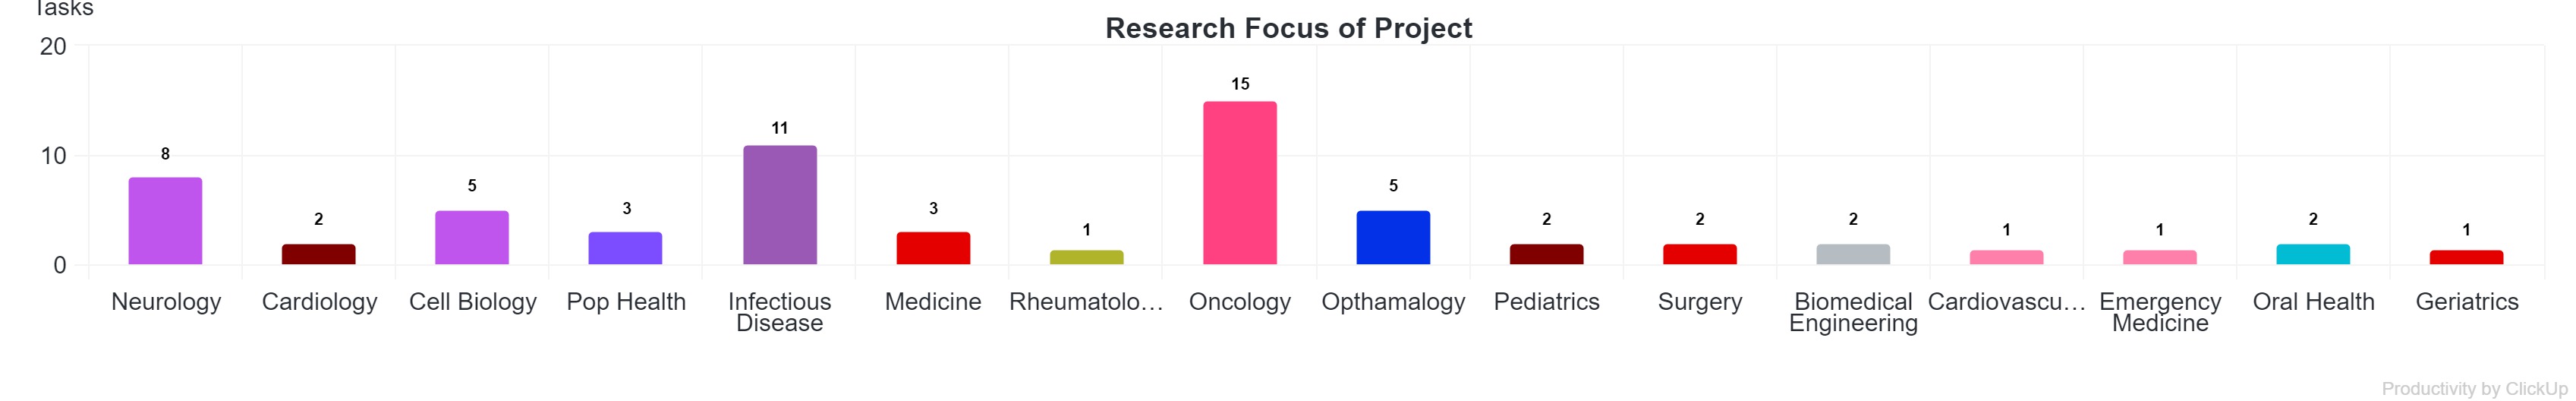 Research Focus of Pilot Projects